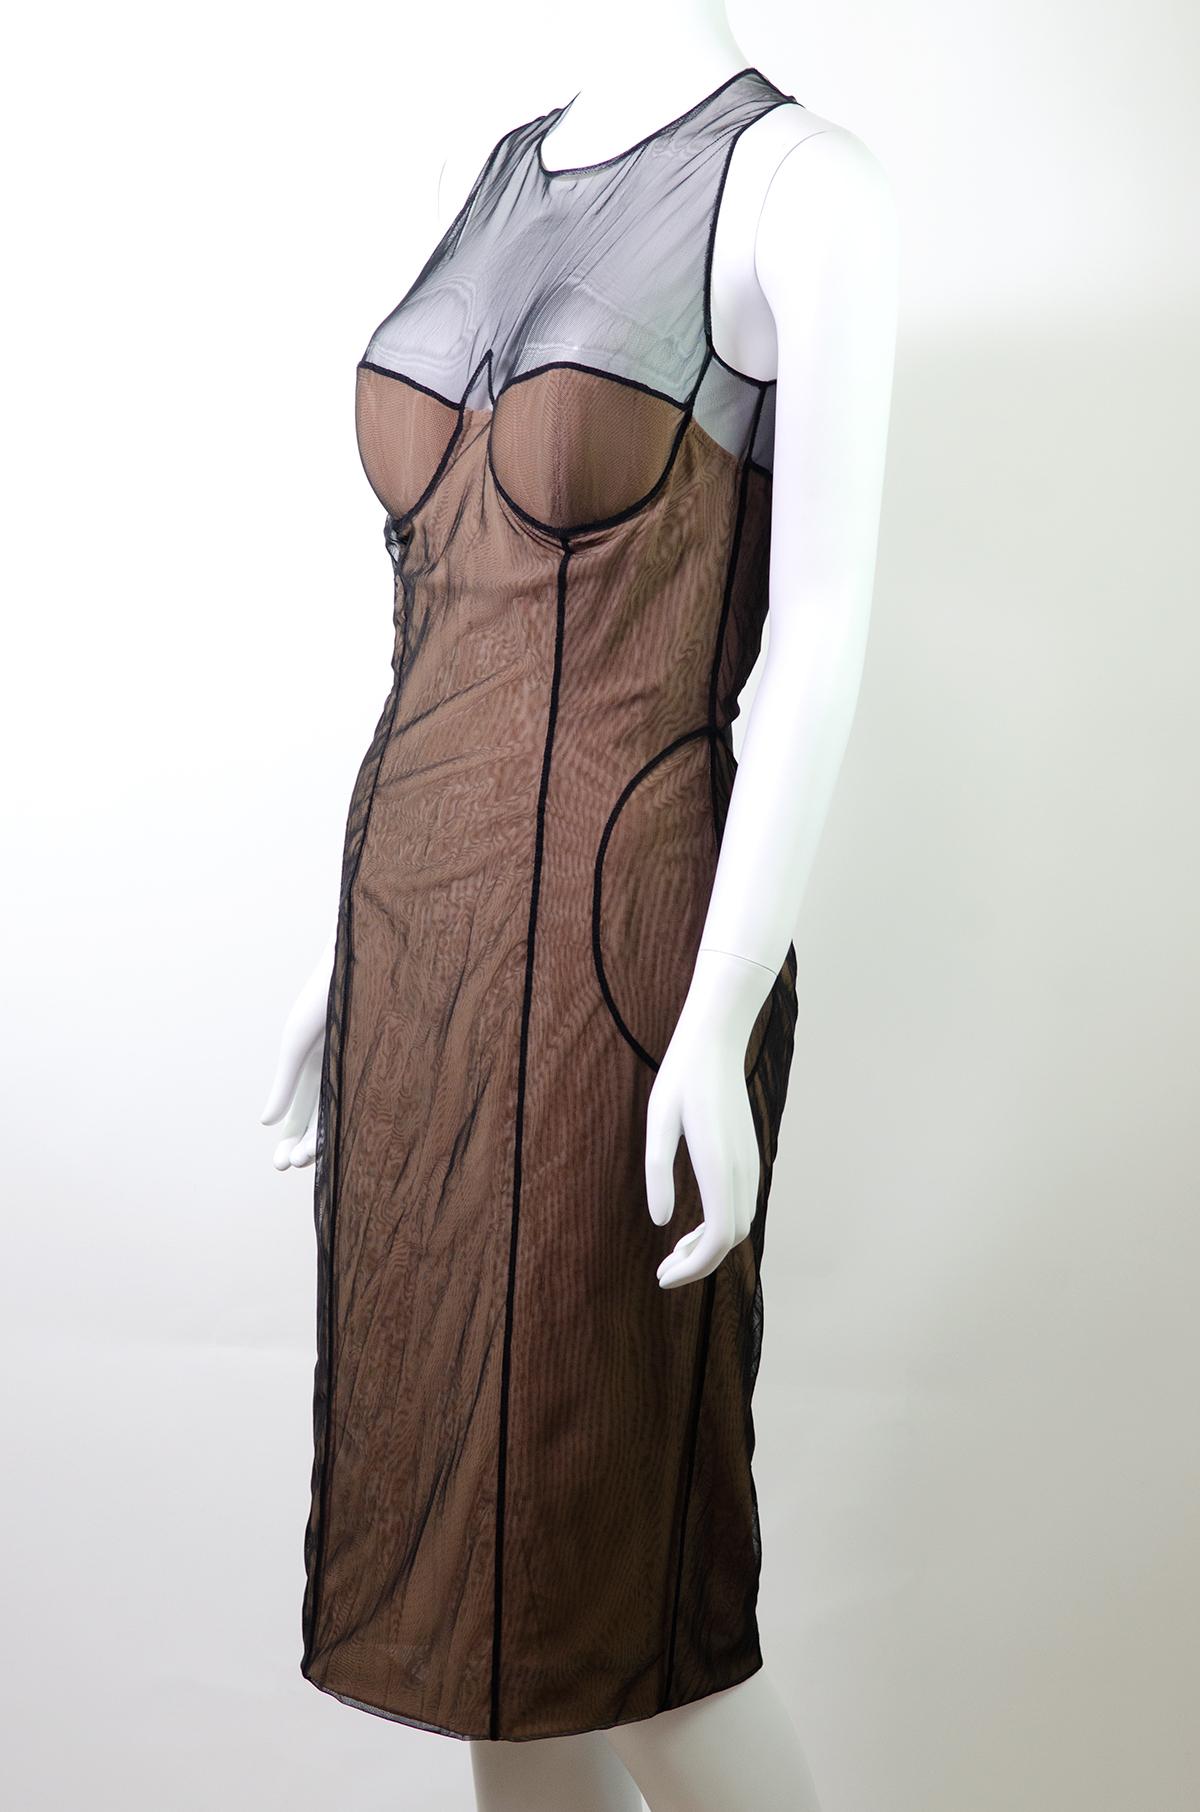 GUCCI by TOM FORD S/S 2001 Mesh Corset Runway Dress New with Tags IT42 In New Condition For Sale In Berlin, BE